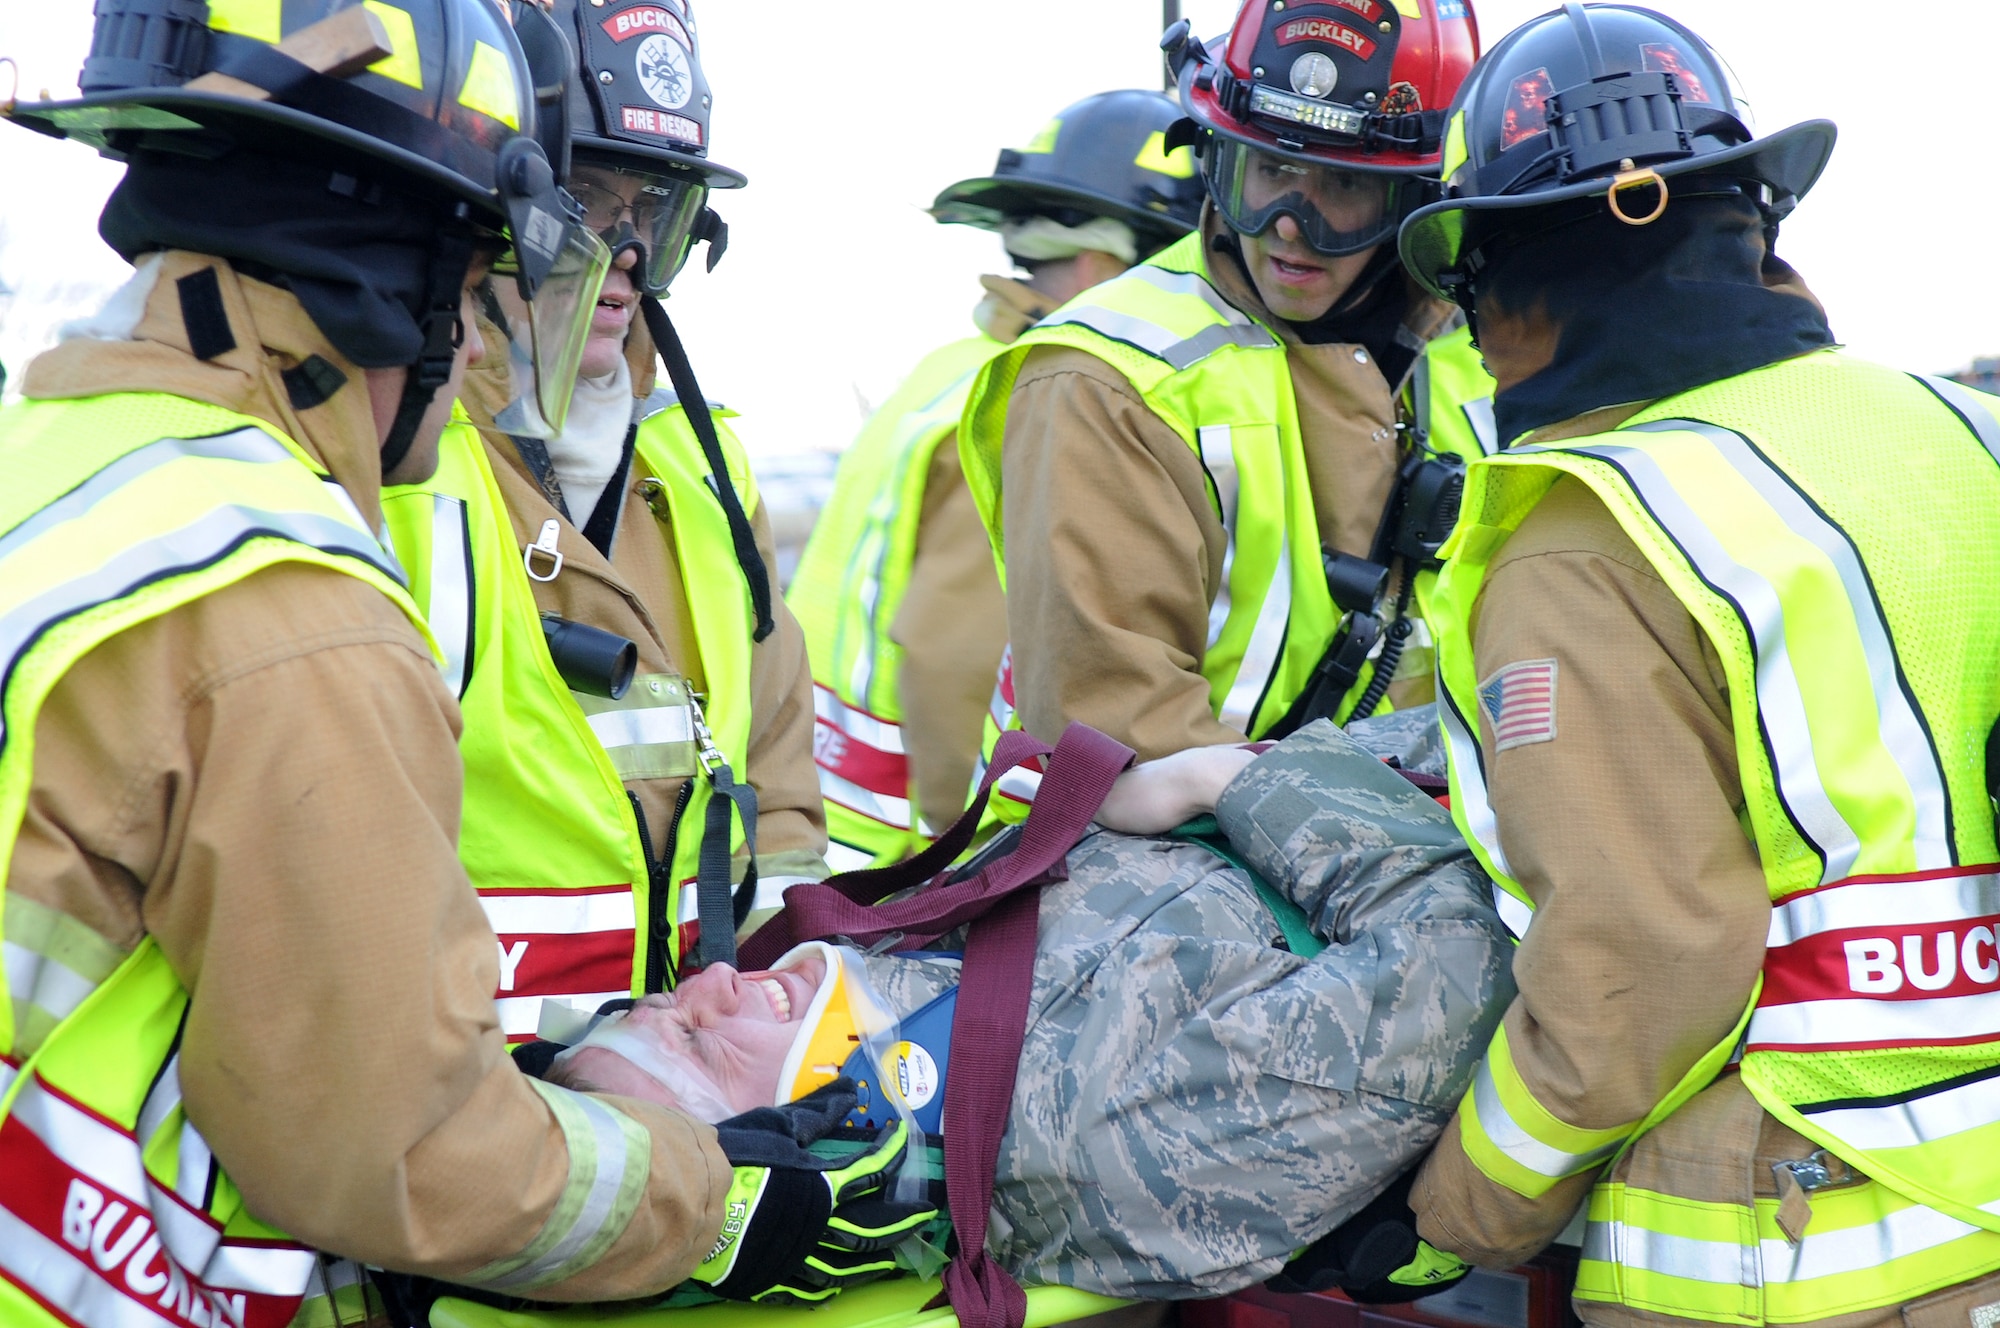 BUCKLEY AIR FORCE BASE, Colo. -- 460th Civil Engineer Squadron firefighters respond to an exercise car accident Feb. 25 as part of the Operational Readiness Inspection. (U.S. Air Force Photo by Airman First Class Marcy Glass)